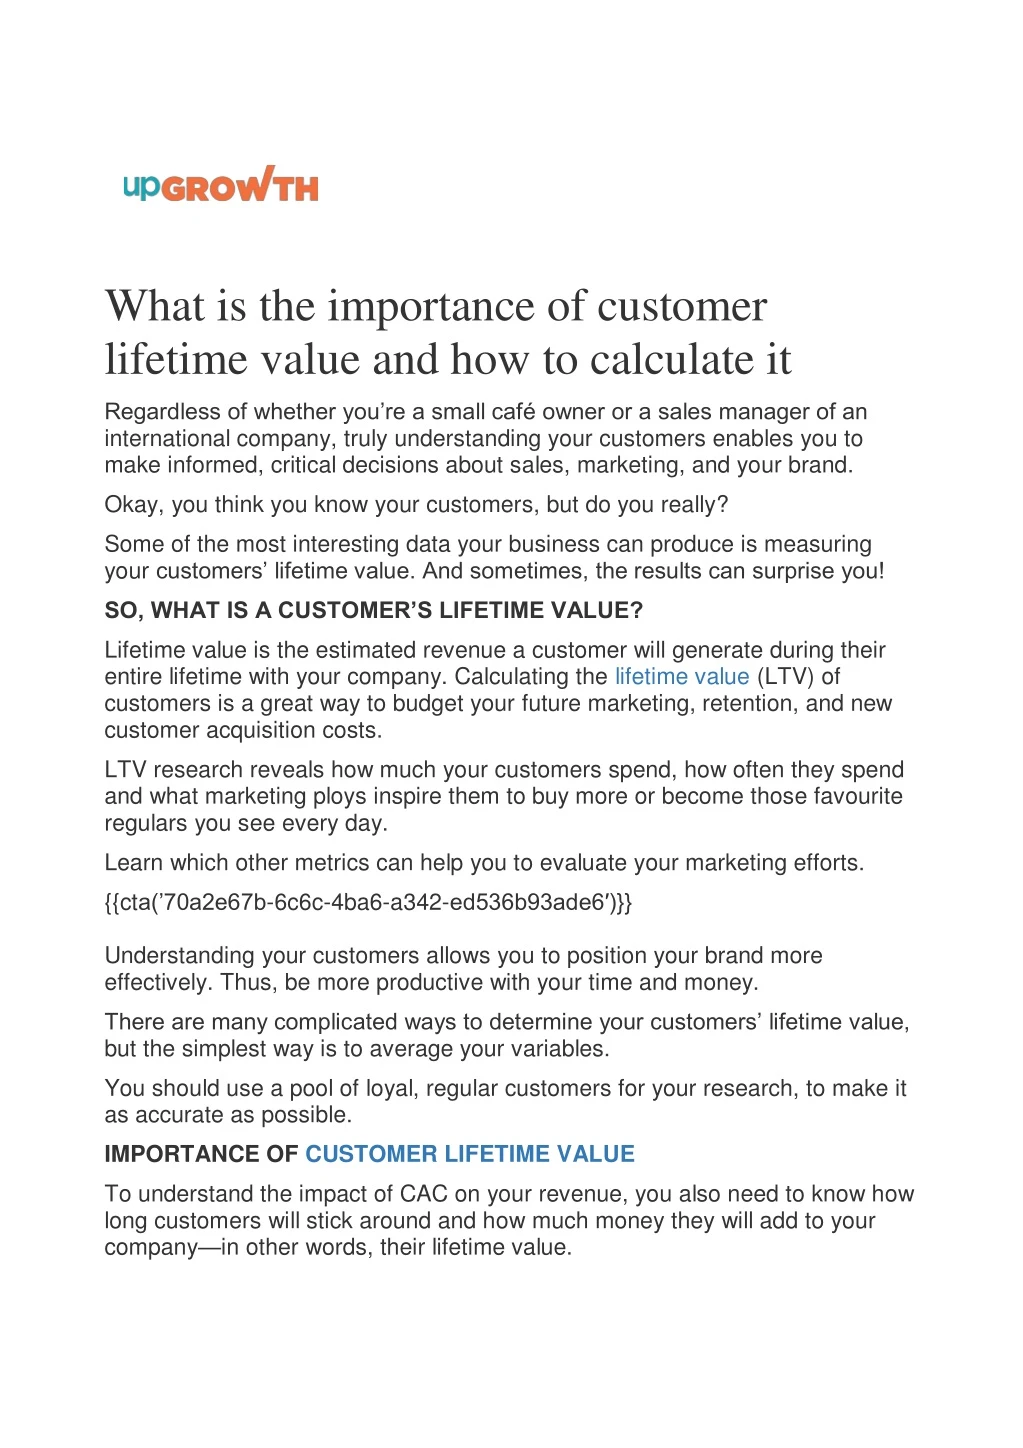 what is the importance of customer lifetime value